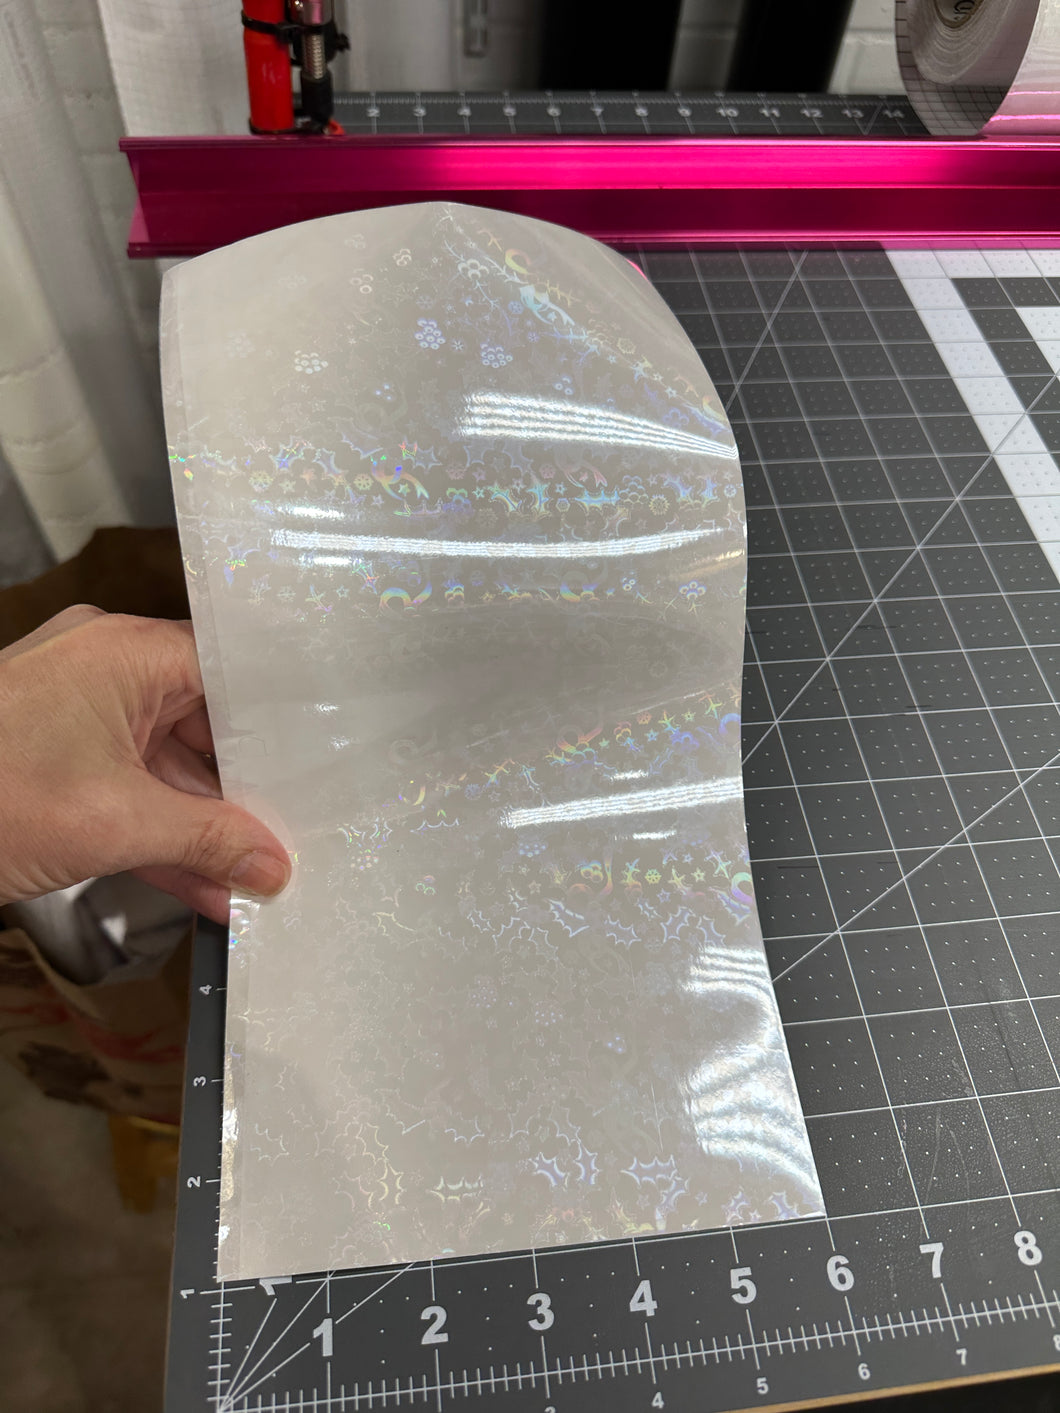 Holographic Holly Laminating Sheets 6 x 12, 8 x 11, 8 1/2 x 11, 12 x 12 inches for Cold Laminating Sticker Overlay